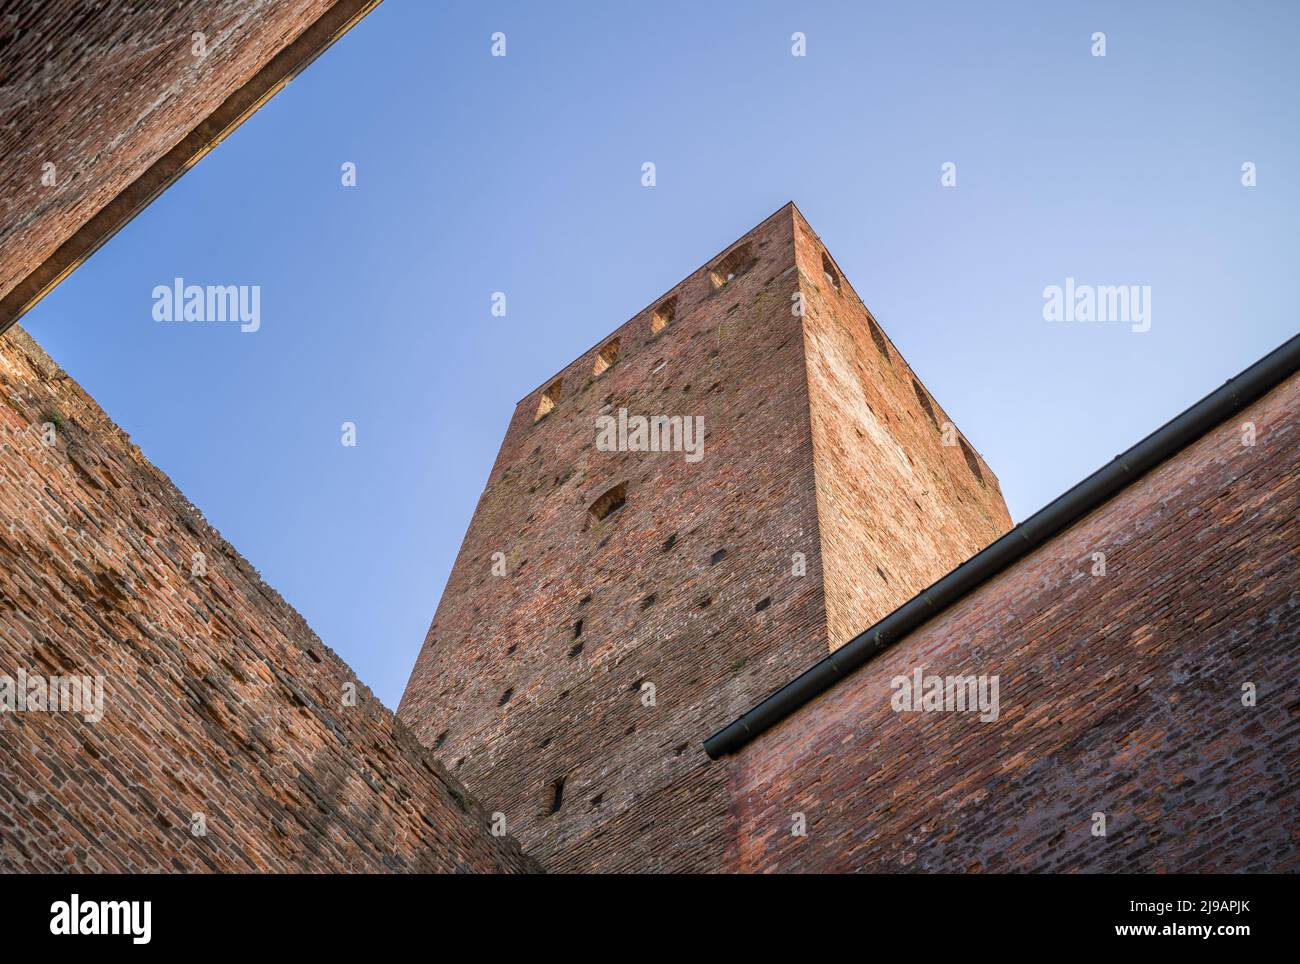 Montagnana, Italy - March 4, 2022: Upward view of the St.Zeno castle with the Ezzelino tower, part of the medieval walls that surround the town Stock Photo